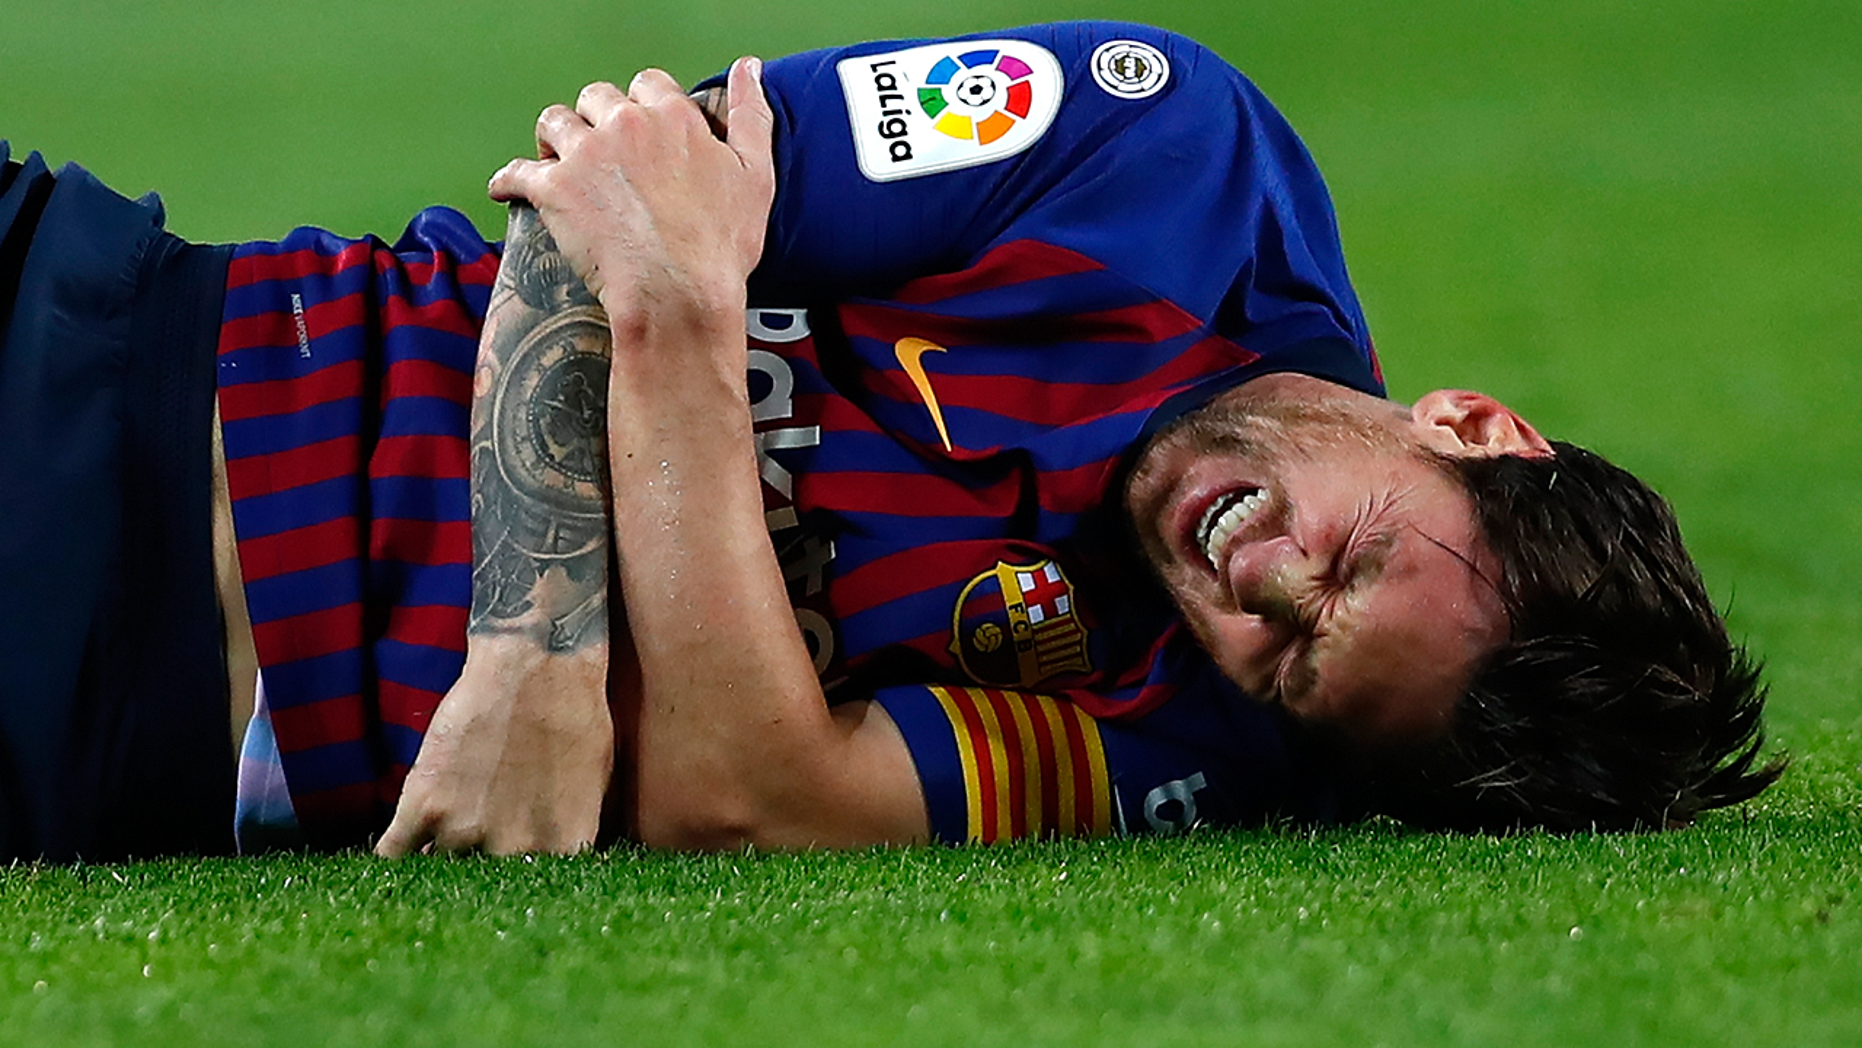 Lionel Messi suffers gruesome injury during Barcelona match | Fox News